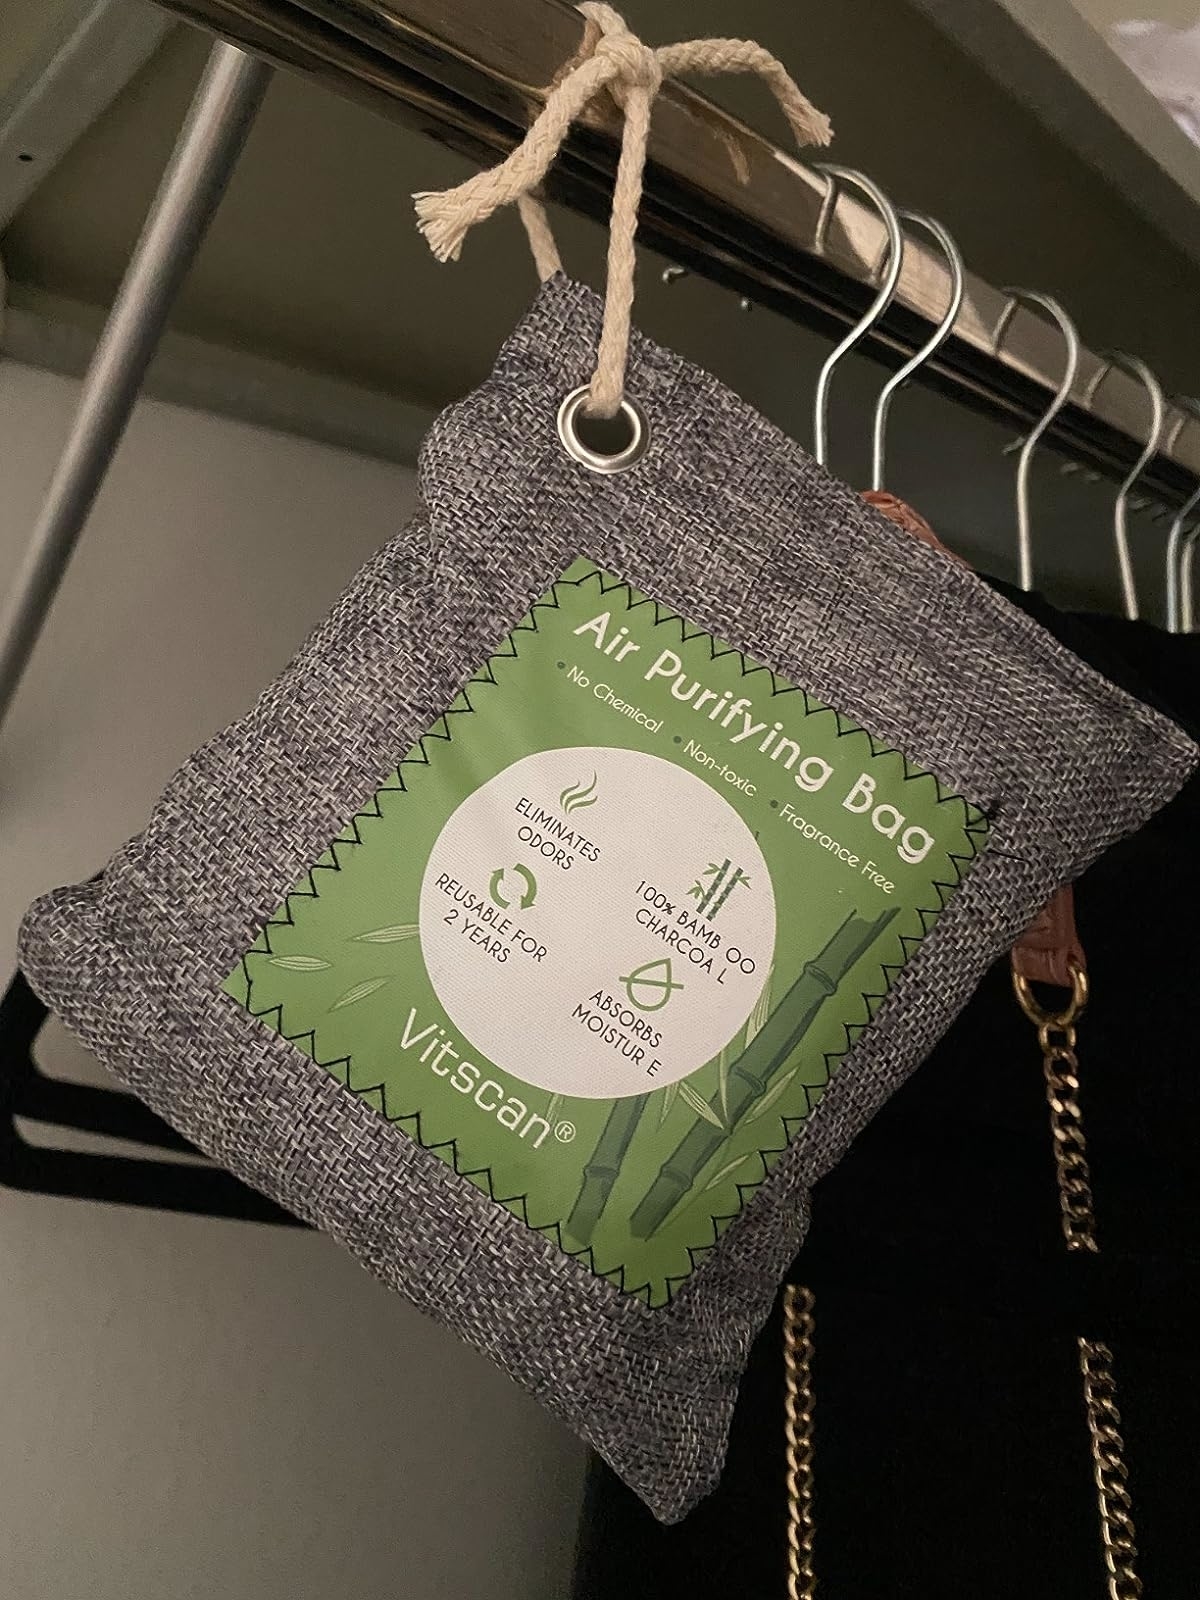 Reviewer image of charcoal odor absorber bag hanging in their closet